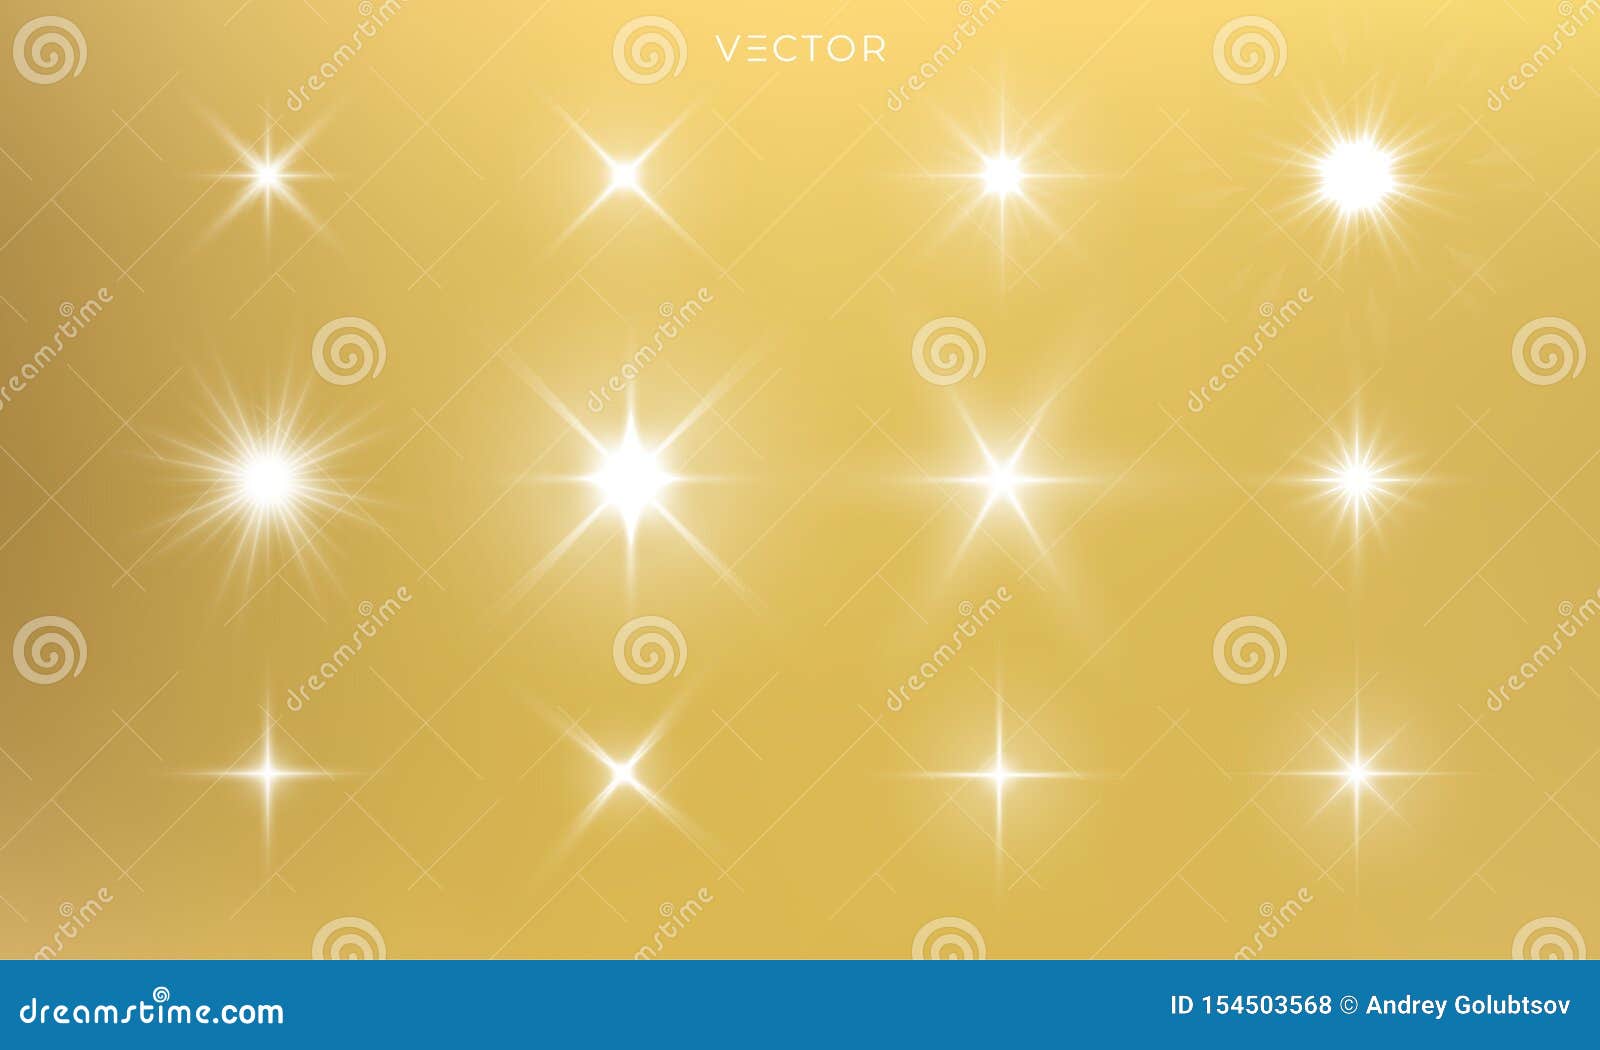 star shine, golden light glow sparks,  bright gold sparkles with lens flare effect.  sun flash and starlight